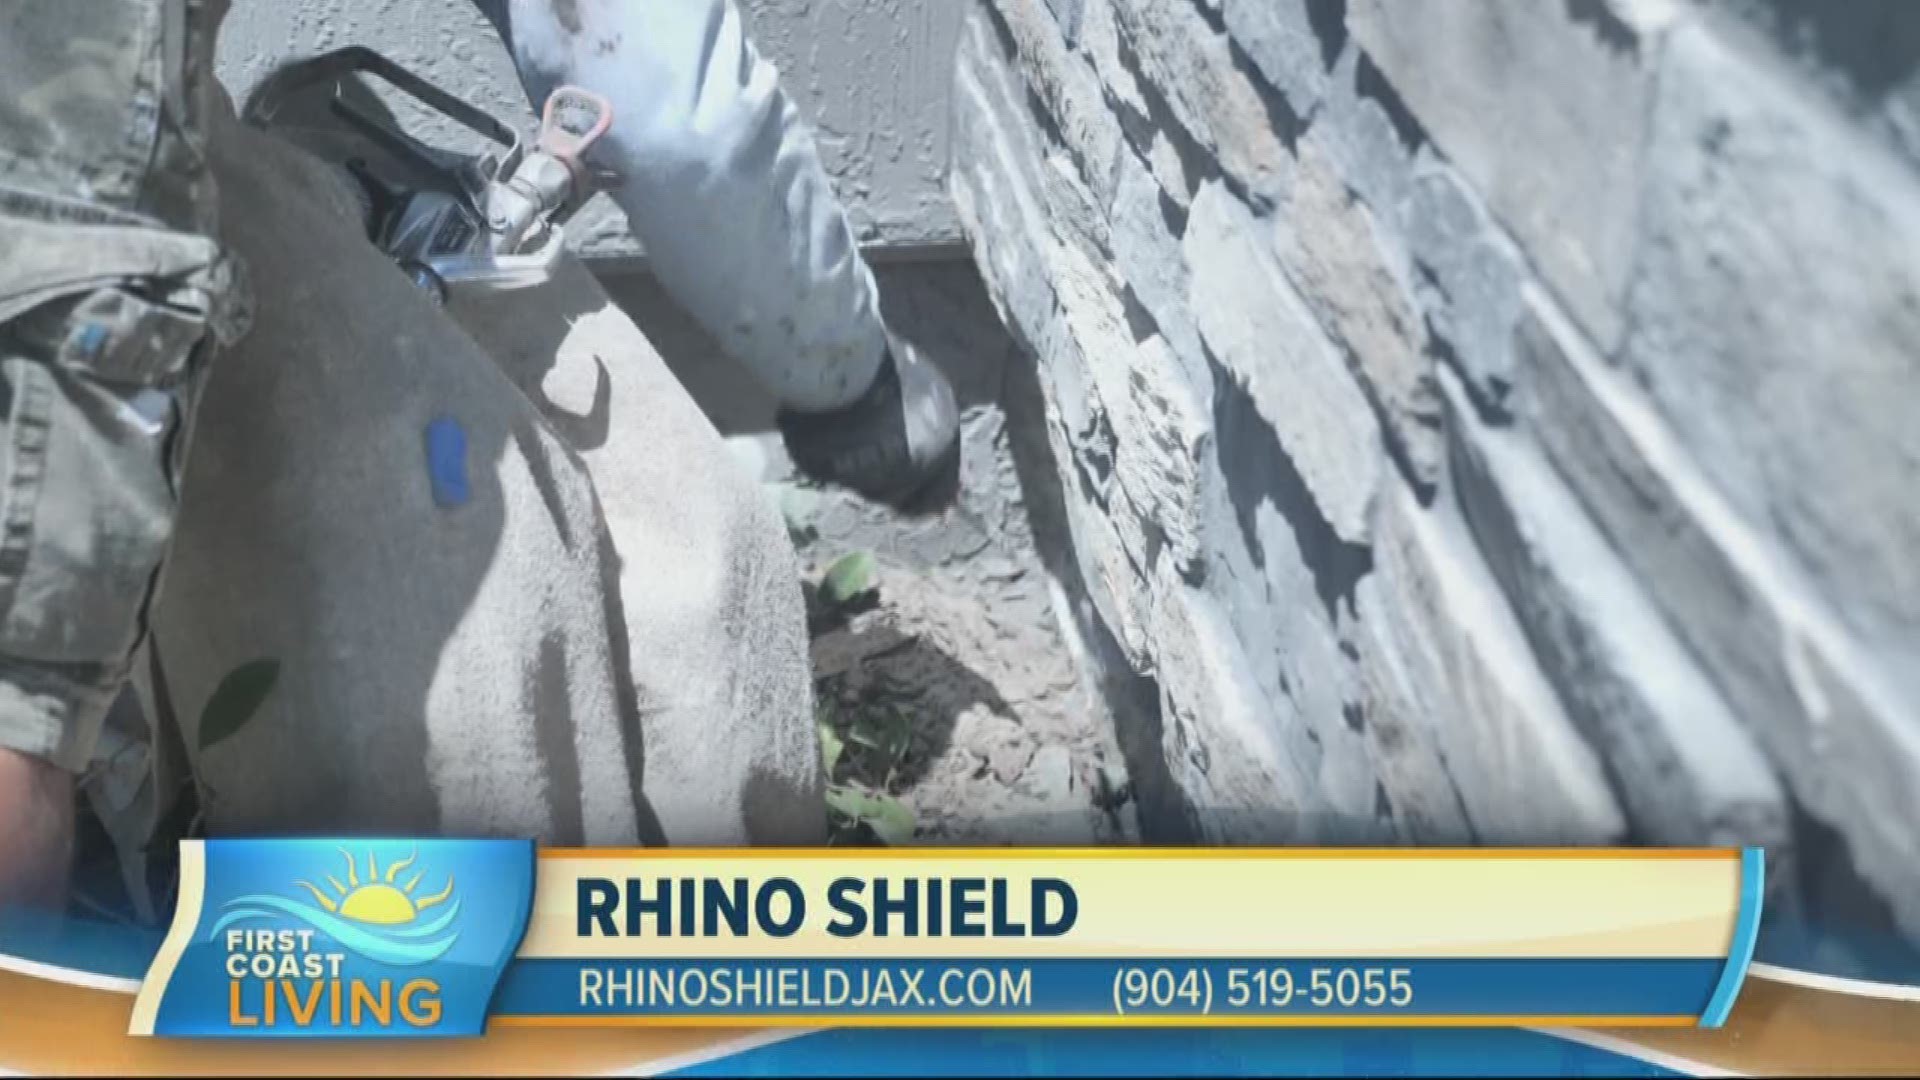 If you're in the market to upgrade the look of your home, check out Rhino Shield!